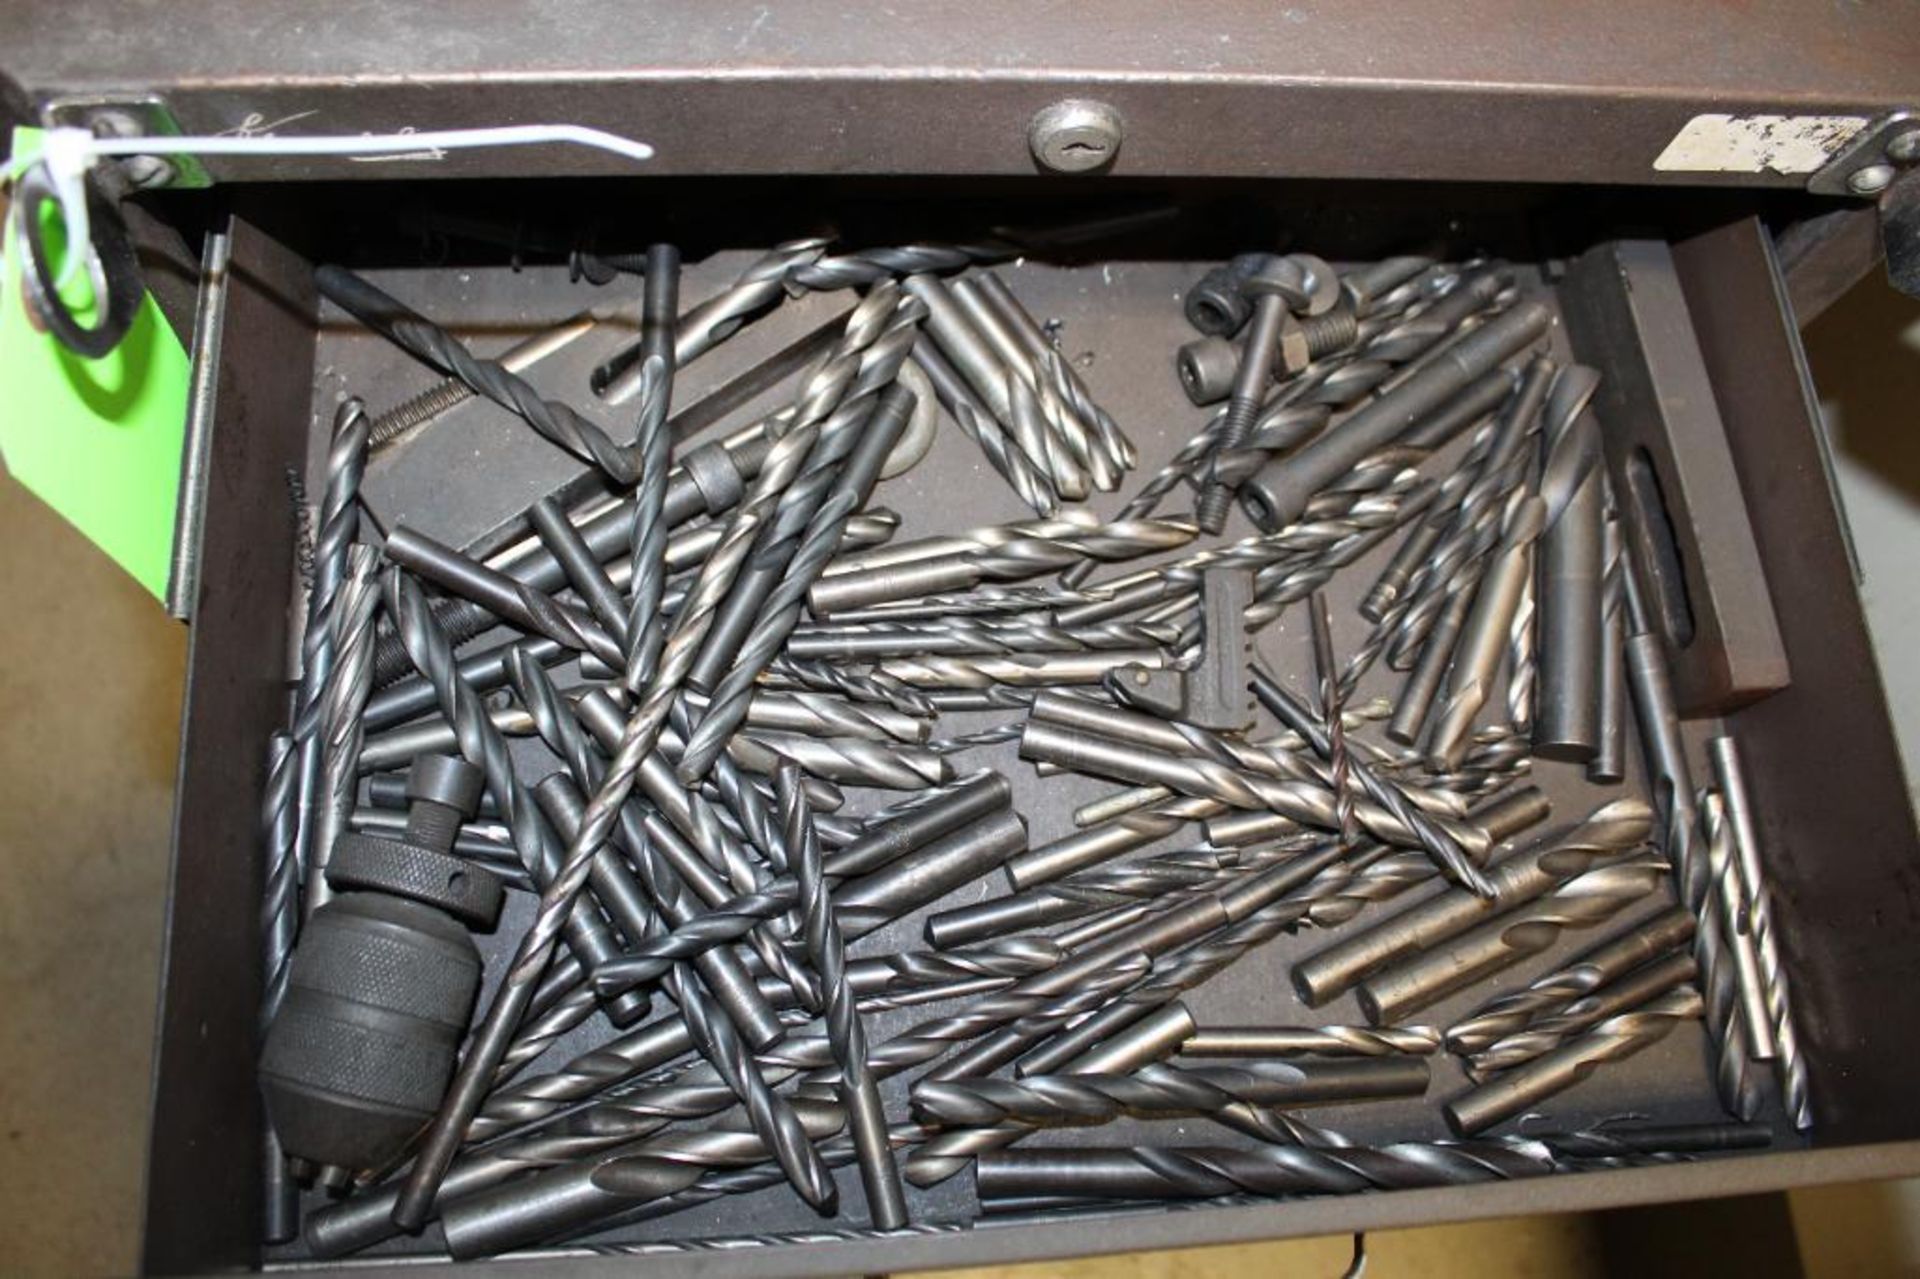 Kennedy Toolbox, Includes Contents - Milling Bits, Taps, Drill Bits - Image 2 of 7